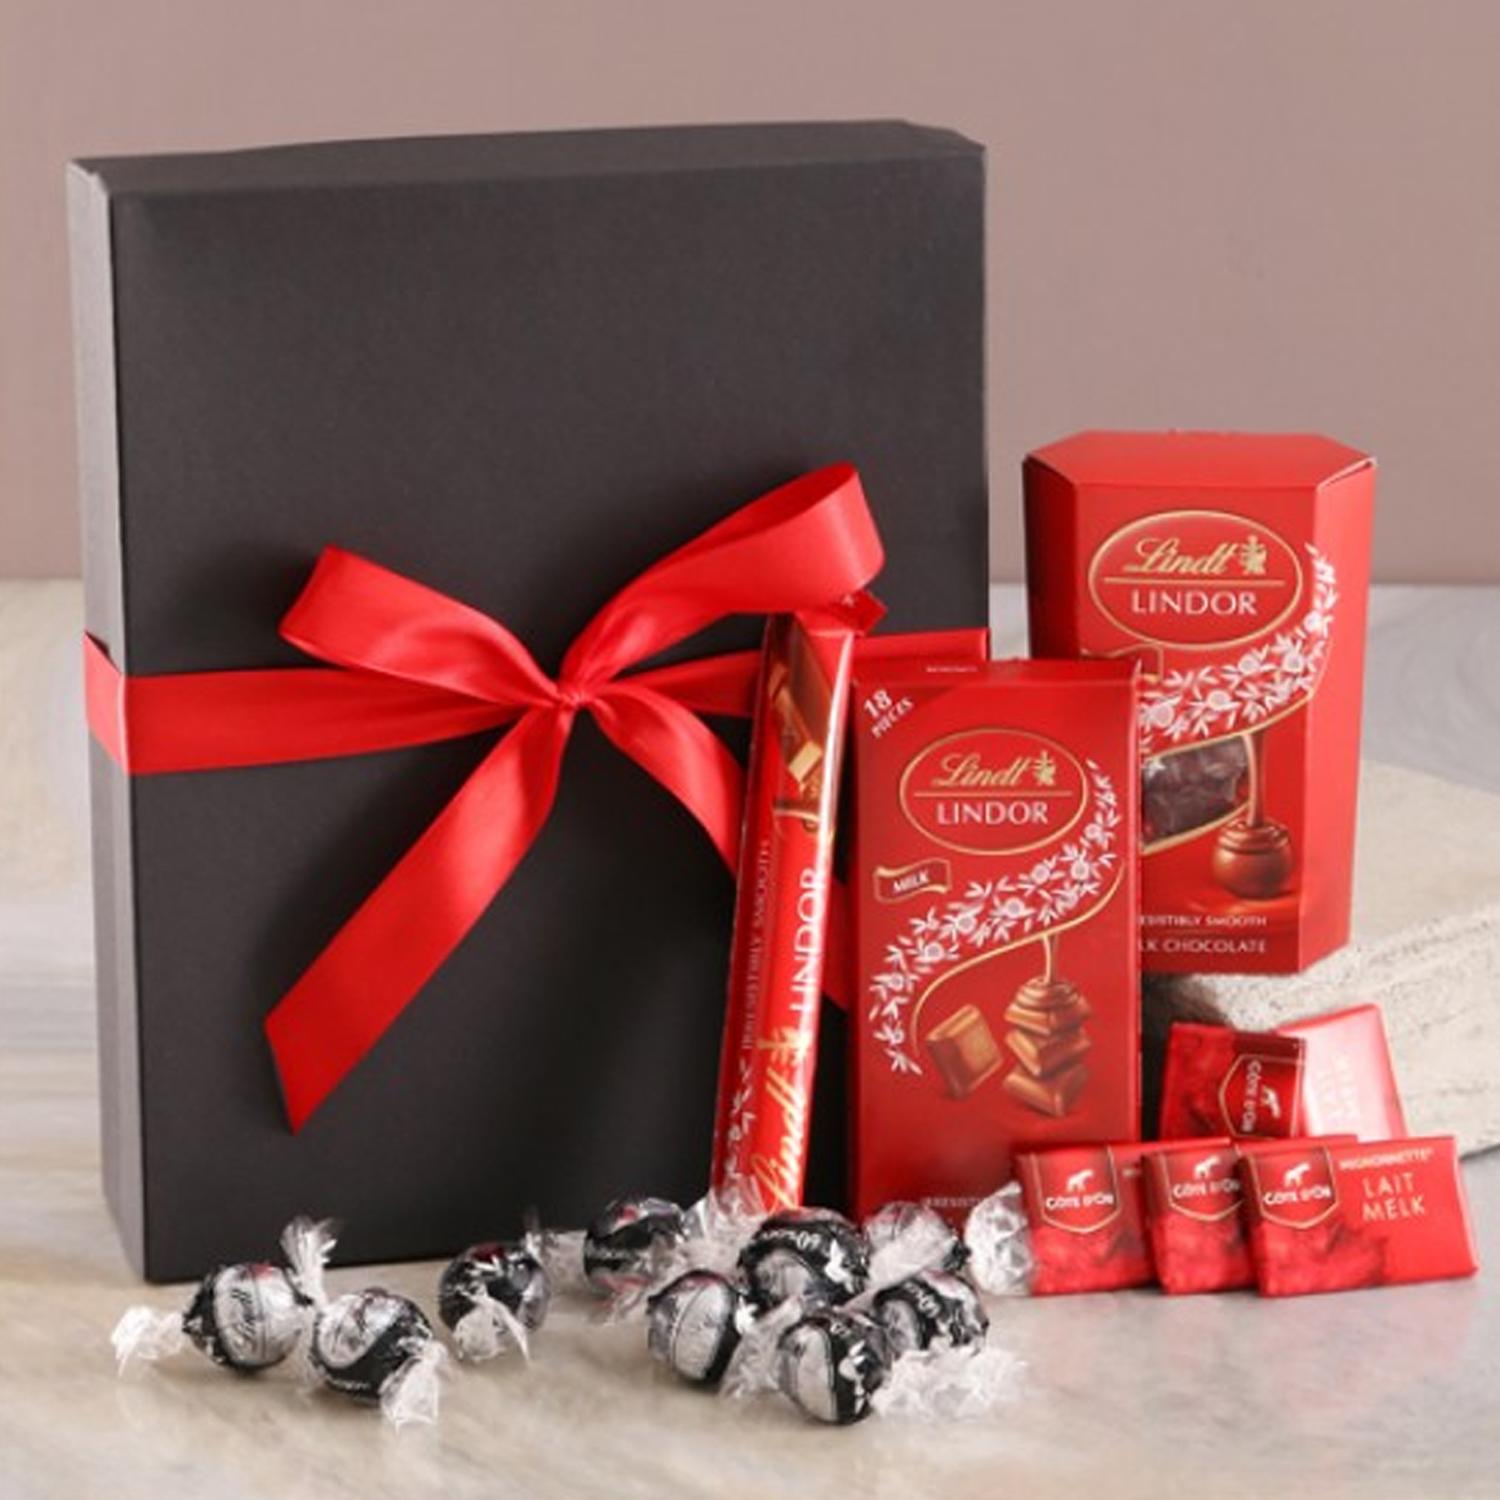 Send Red Lindt Chocolate Box With Cute Teddy Online